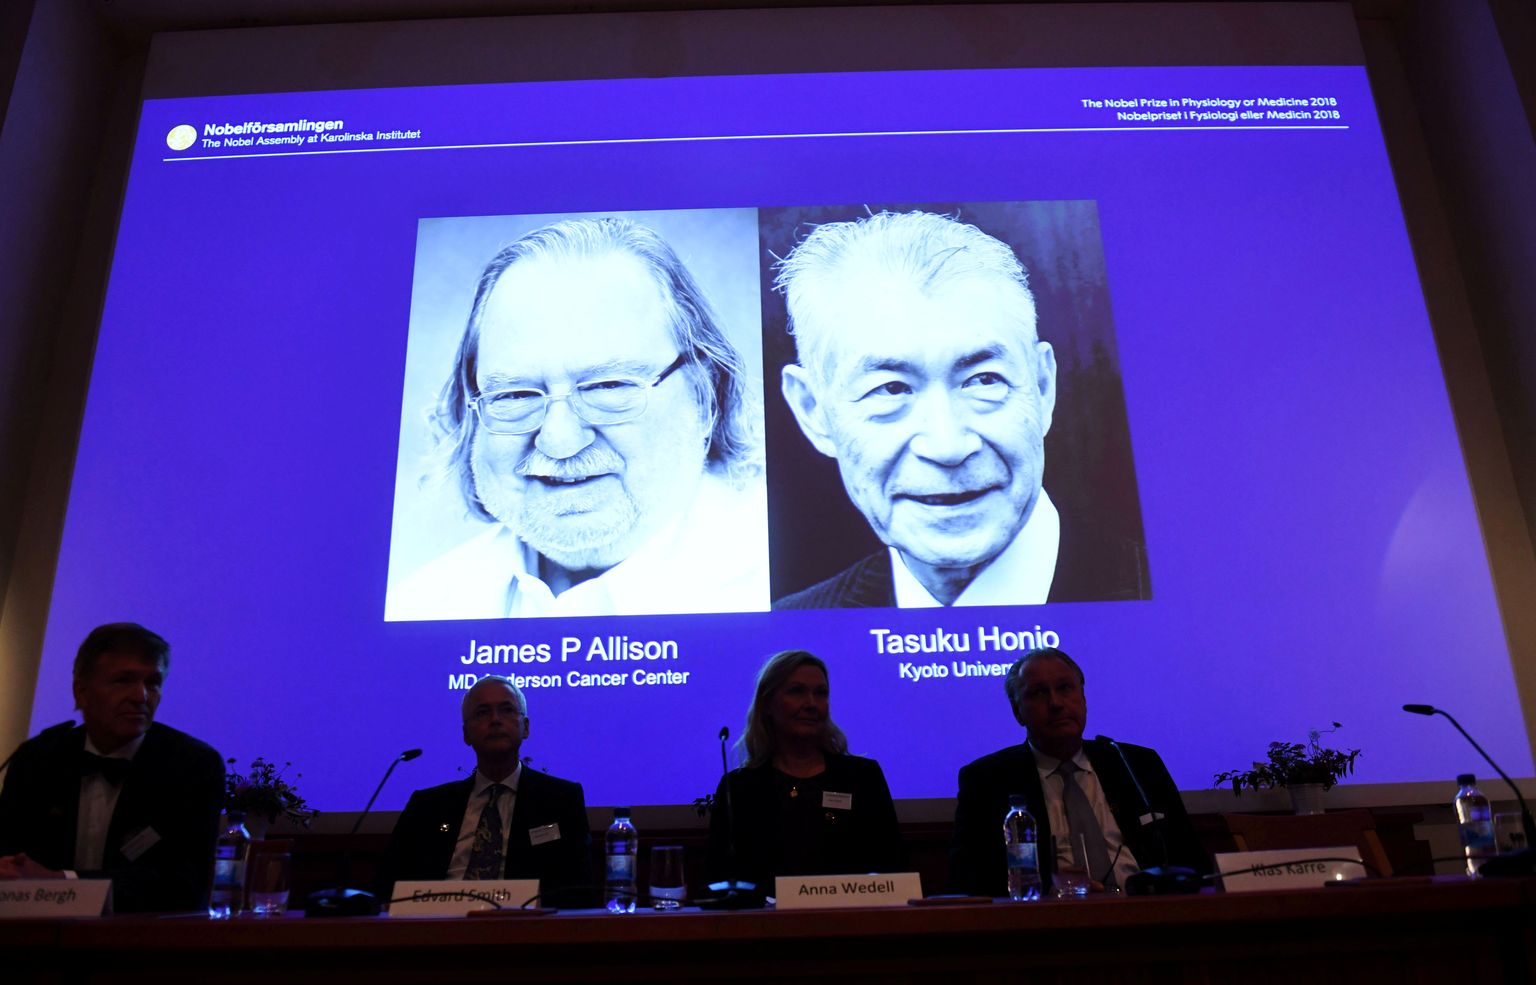 The Nobel Prize laureates for Medicine or Physiology 2018 are James P. Allison, U.S. and Tasuku Honjo, Japan presented at the Karolinska Institute in Stockholm, Sweden October 1, 2018. TT News Agency/Fredrik Sandberg via REUTERS      ATTENTION EDITORS - THIS IMAGE WAS PROVIDED BY A THIRD PARTY. SWEDEN OUT. NO COMMERCIAL OR EDITORIAL SALES IN SWEDEN.